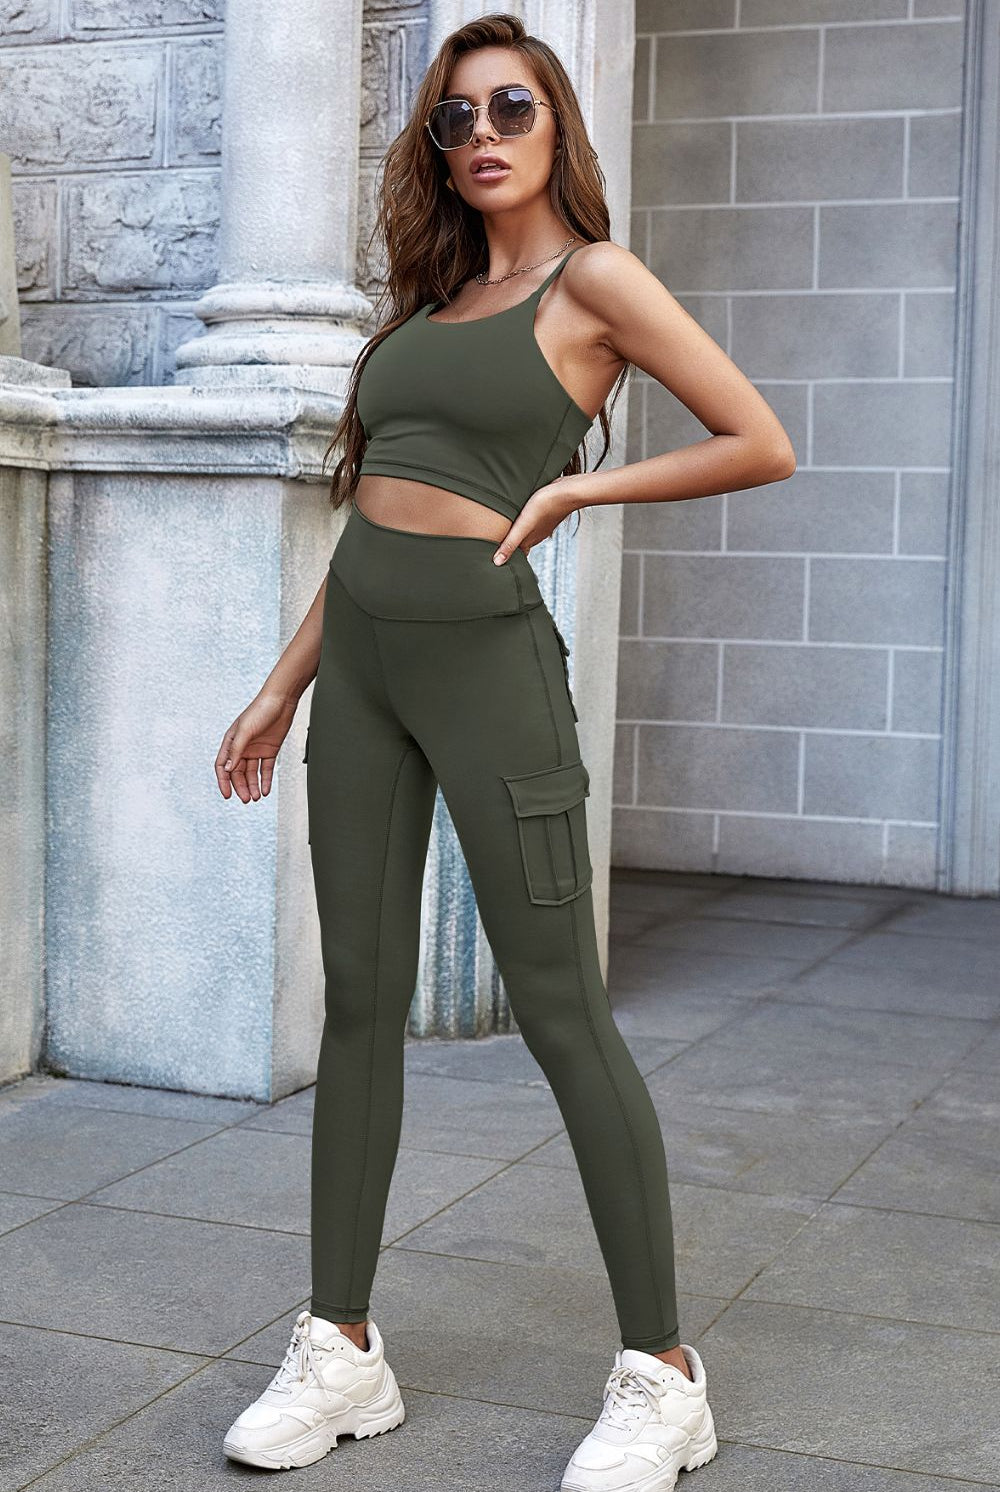 Light Slate Gray The Lost Files High Waist Leggings with Pockets Pants